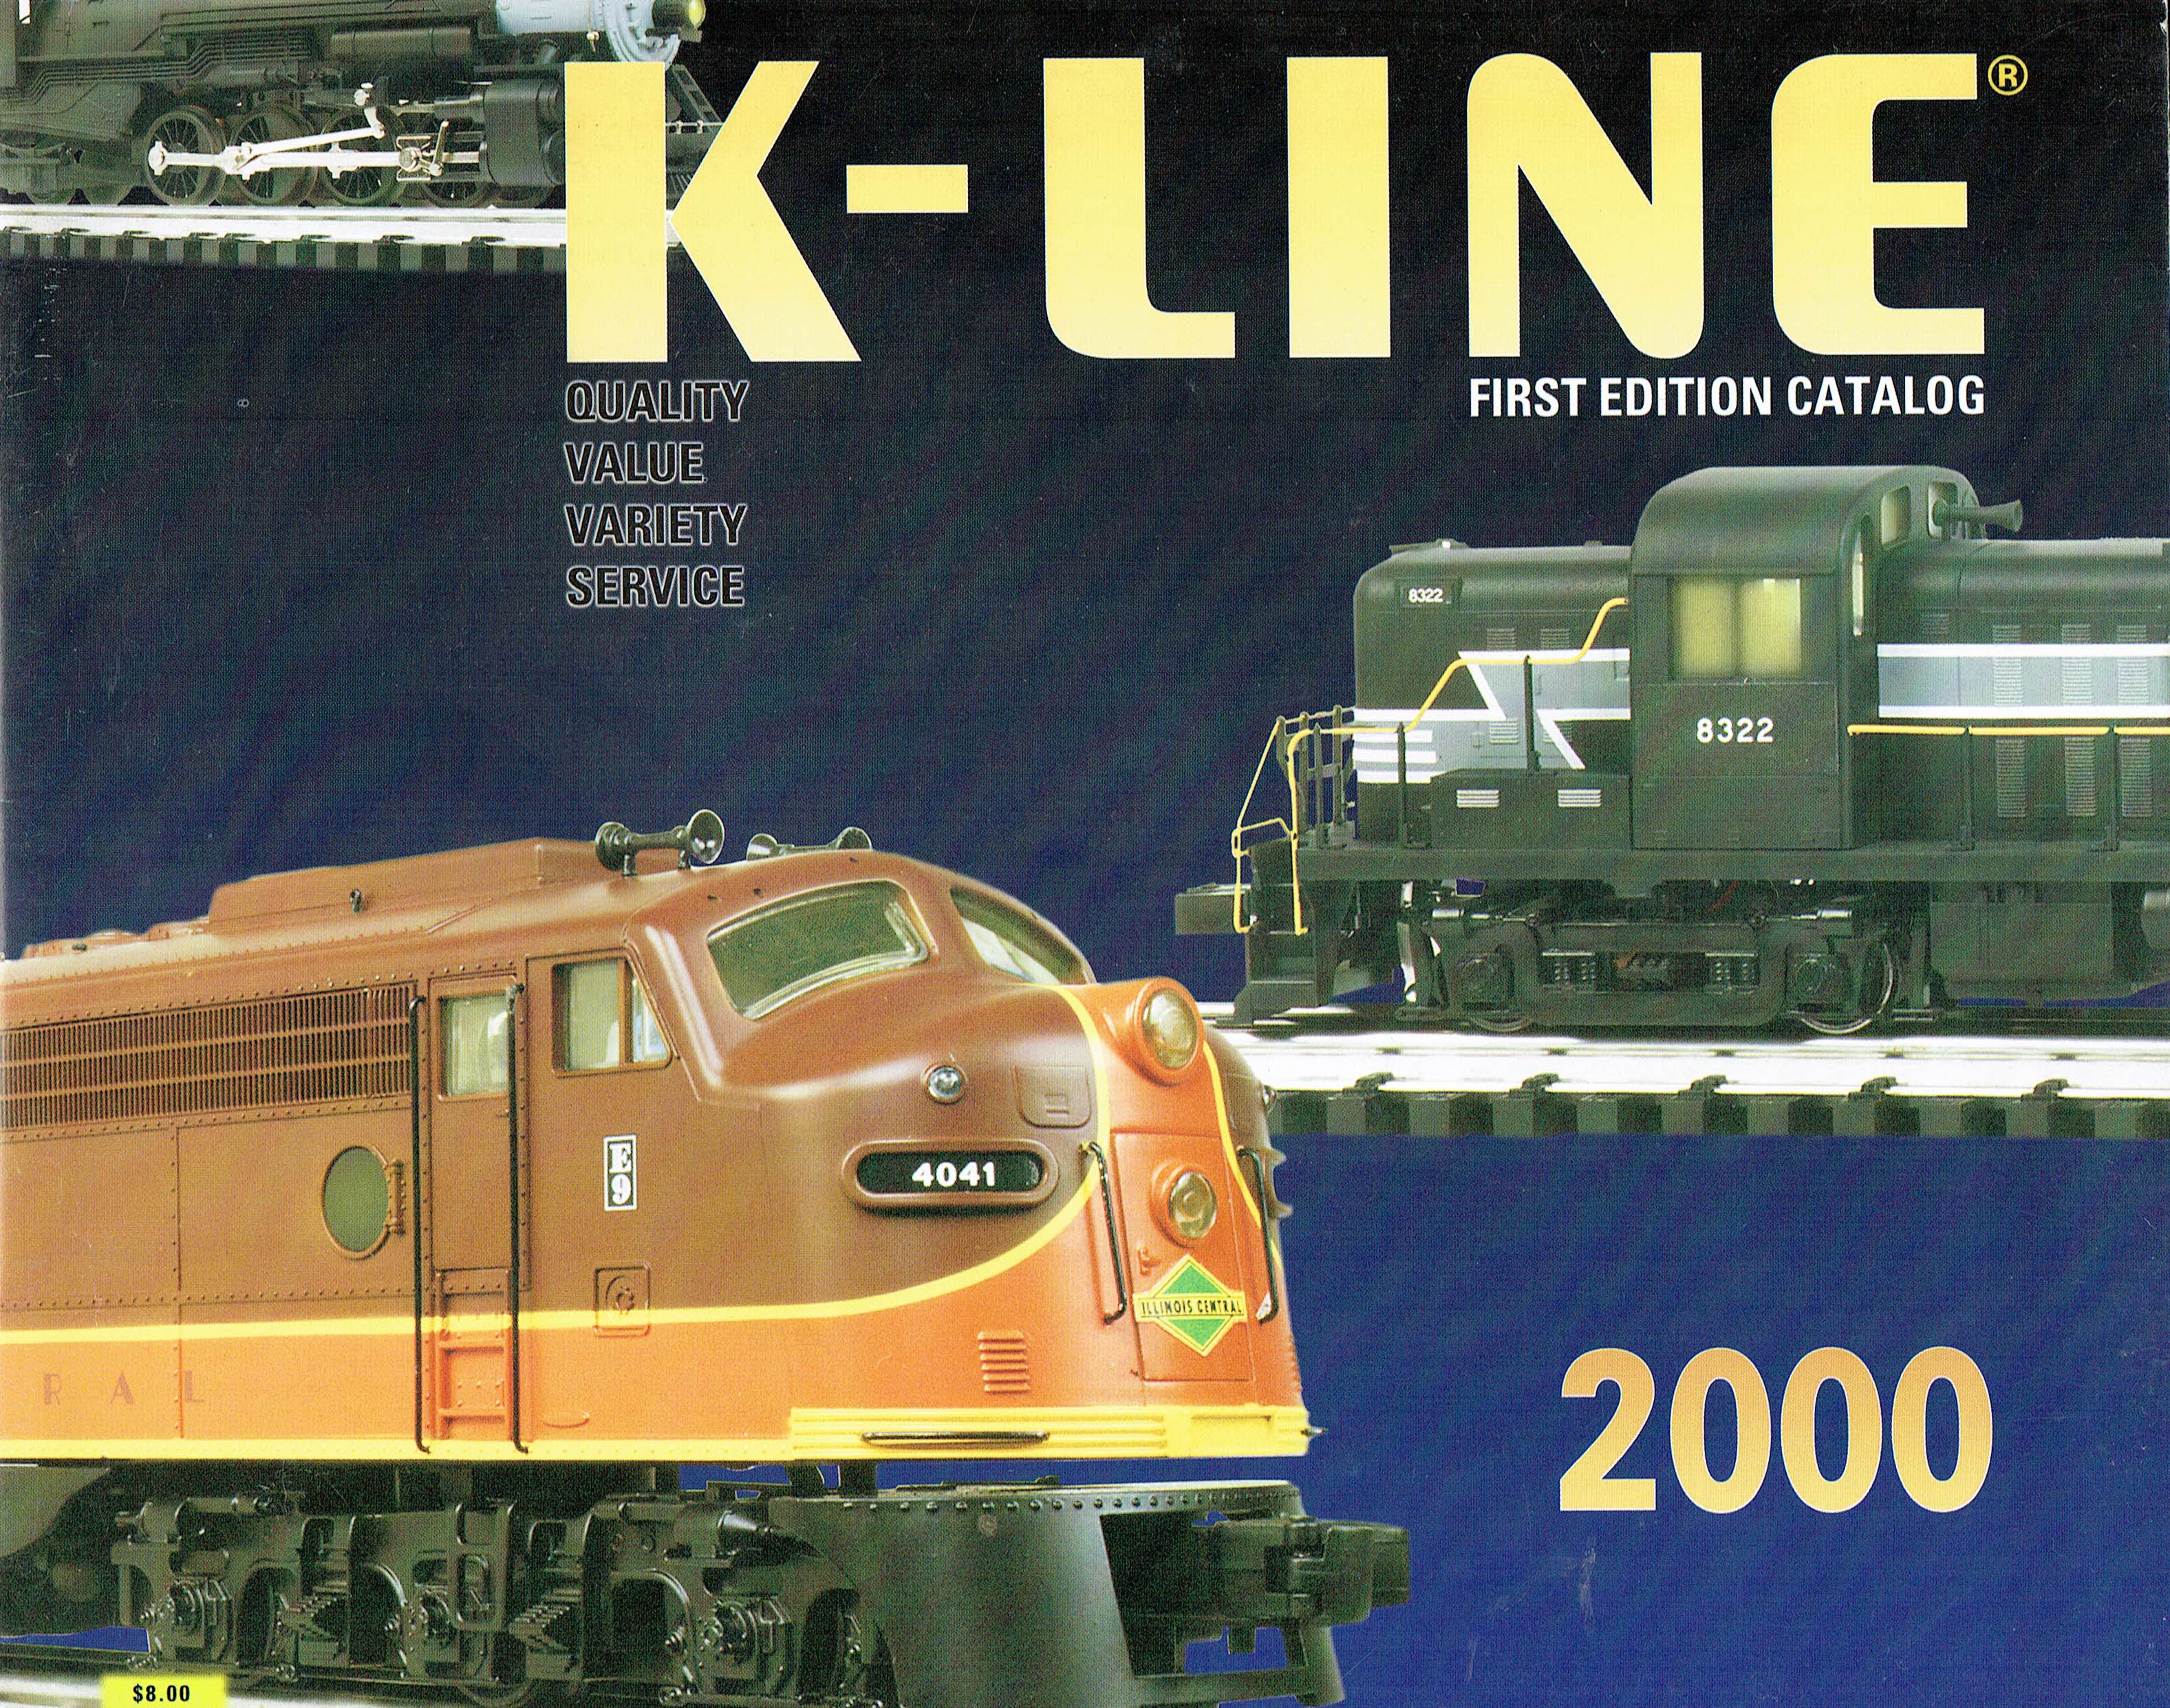 K-Line 2000 First Edition Catalog image